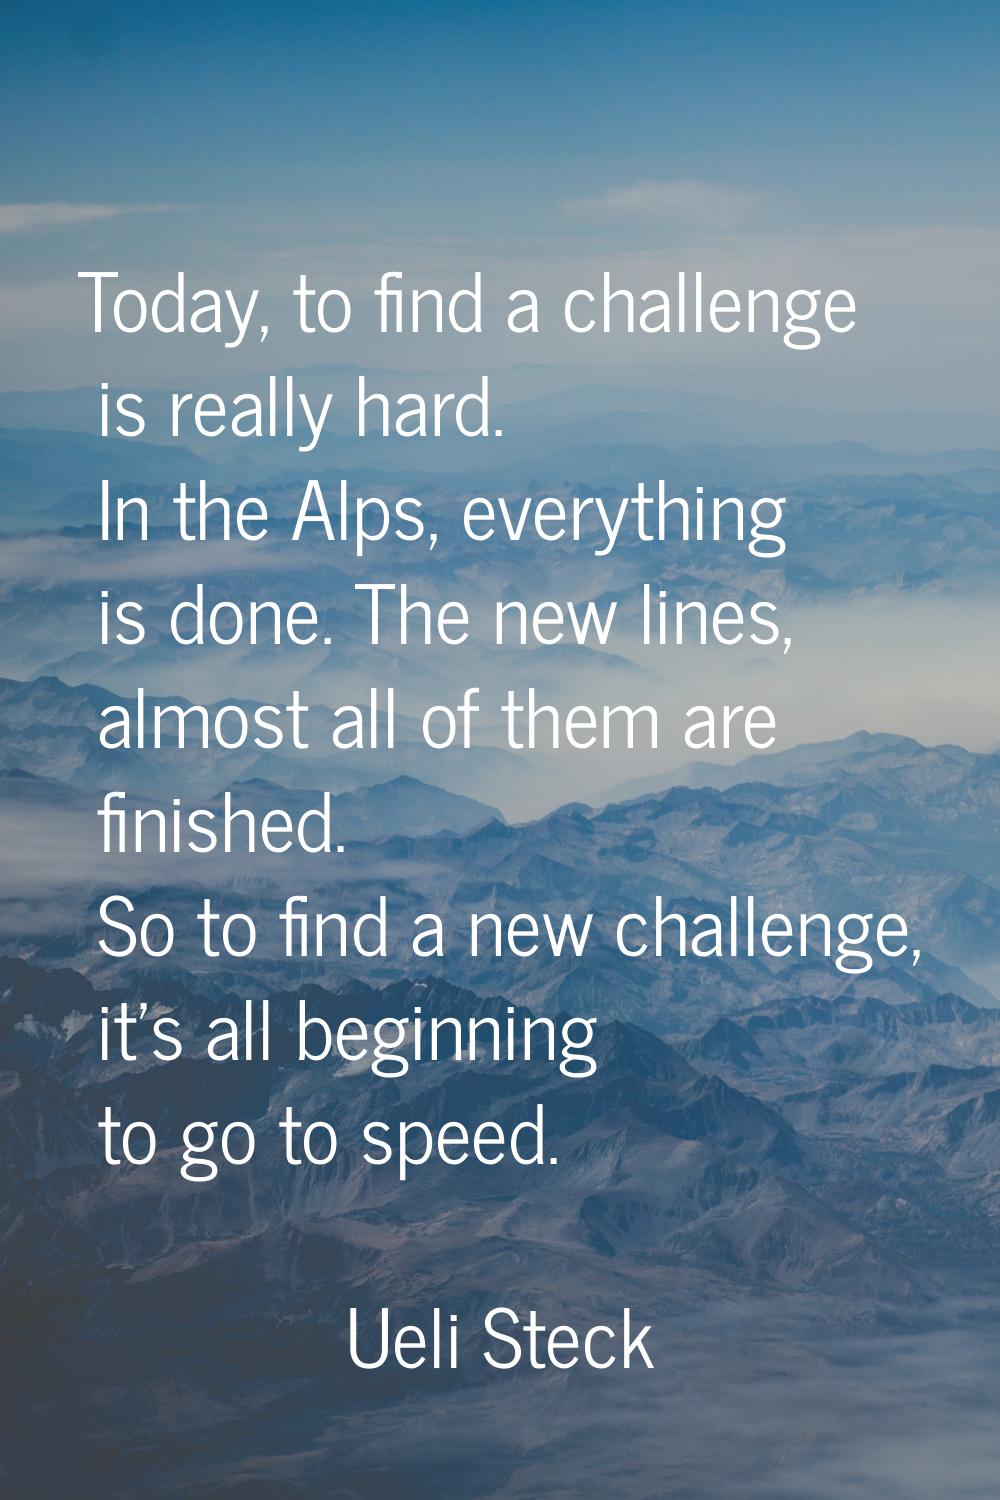 Today, to find a challenge is really hard. In the Alps, everything is done. The new lines, almost a